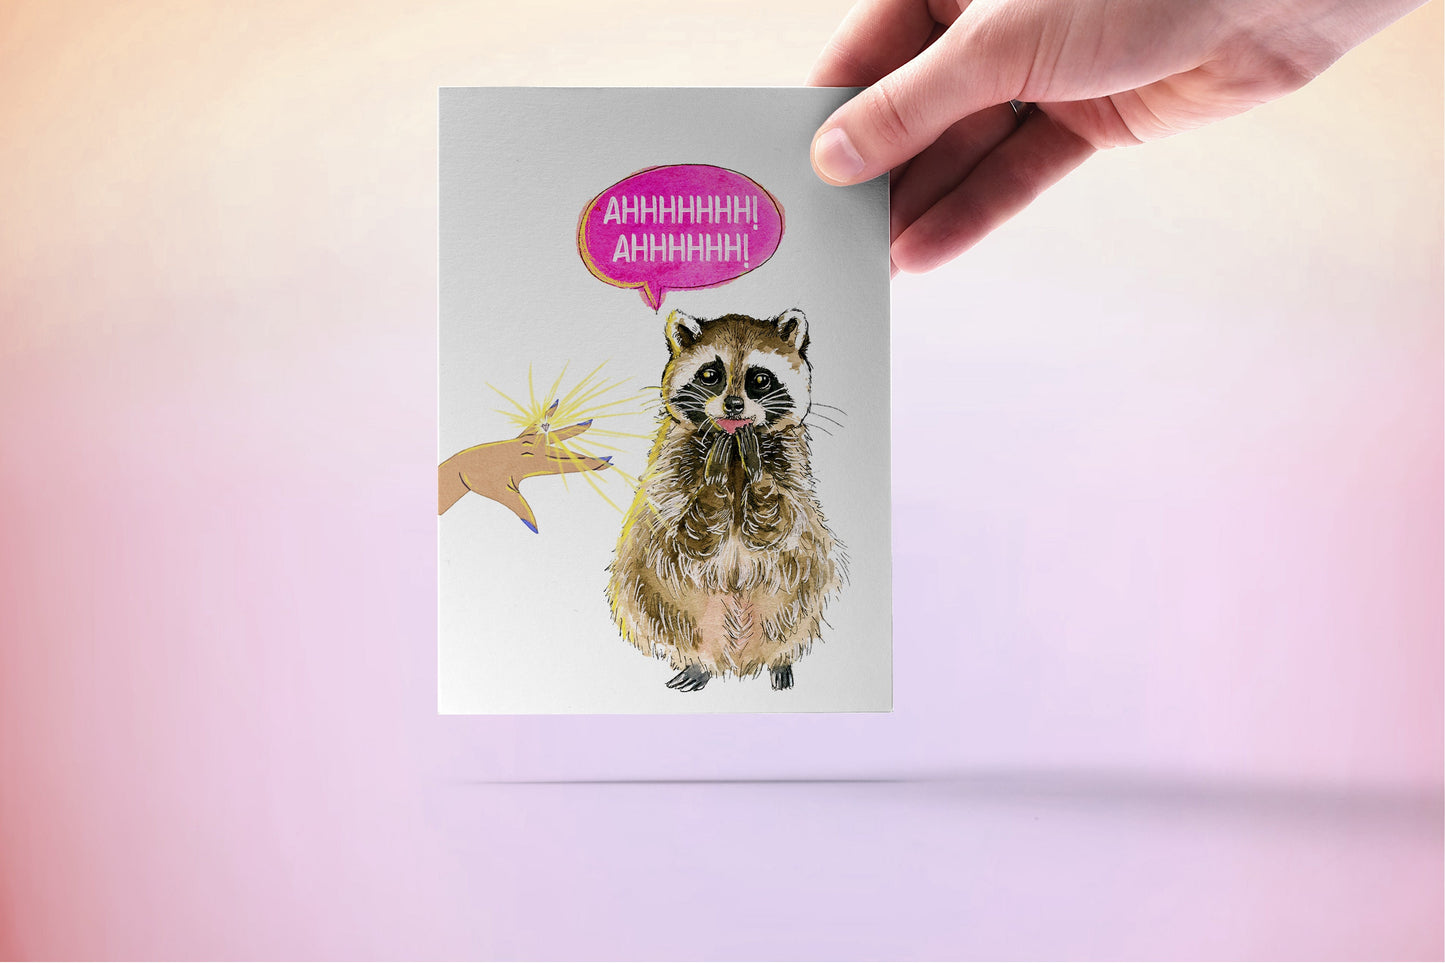 Raccoon Congrats Engagement Card Funny - Best Friend Bridal Shower Card - Shiny Ring Proposal Gifts